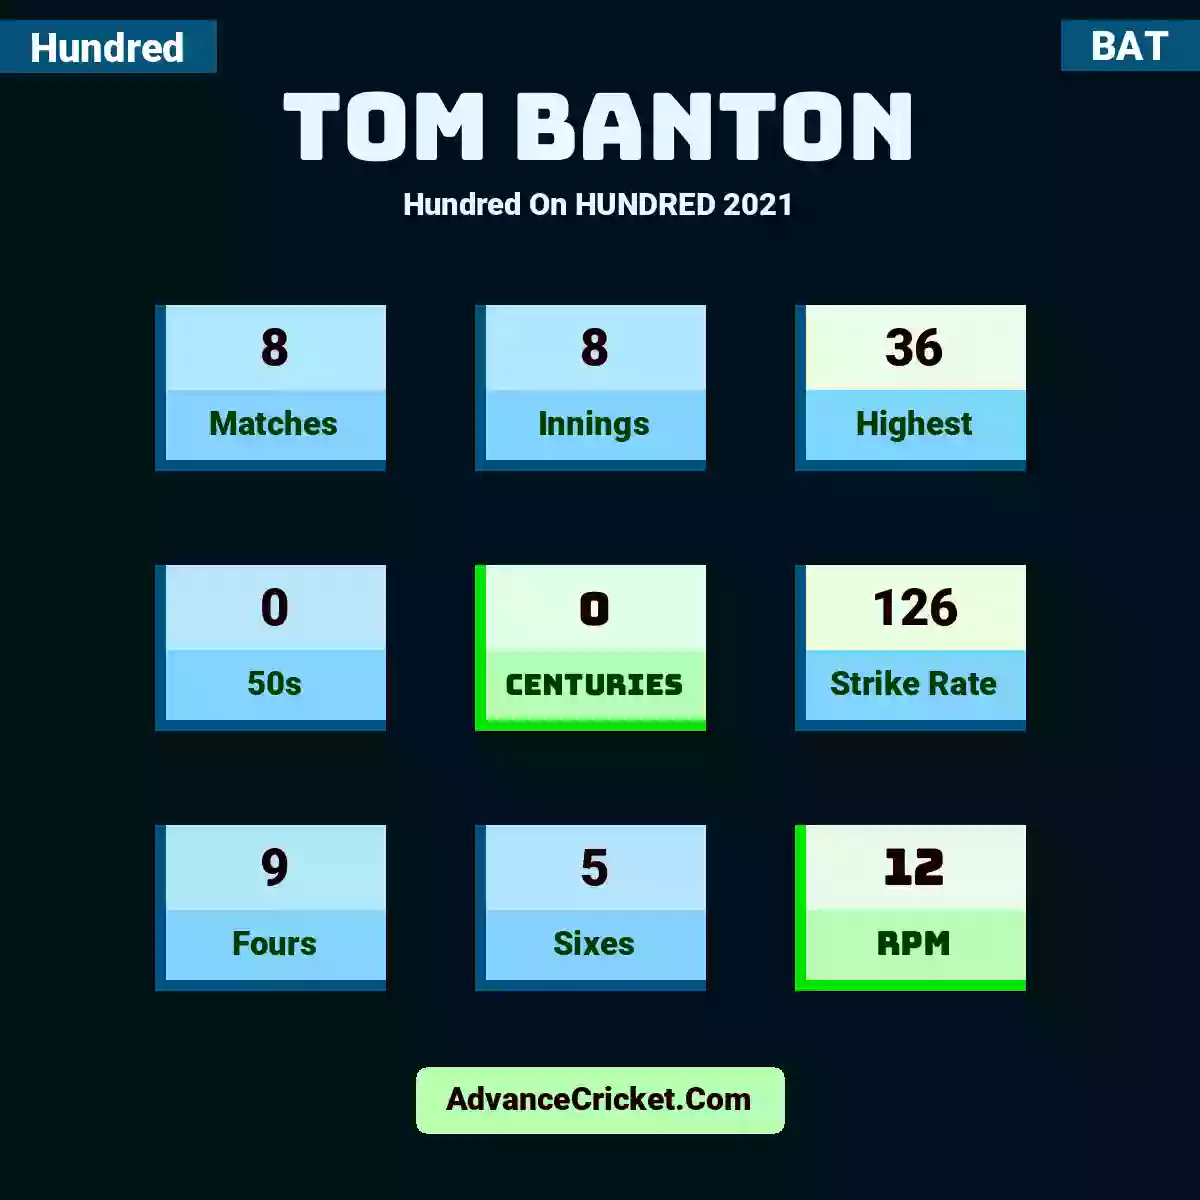 Tom Banton Hundred  On HUNDRED 2021, Tom Banton played 8 matches, scored 36 runs as highest, 0 half-centuries, and 0 centuries, with a strike rate of 126. T.Banton hit 9 fours and 5 sixes, with an RPM of 12.